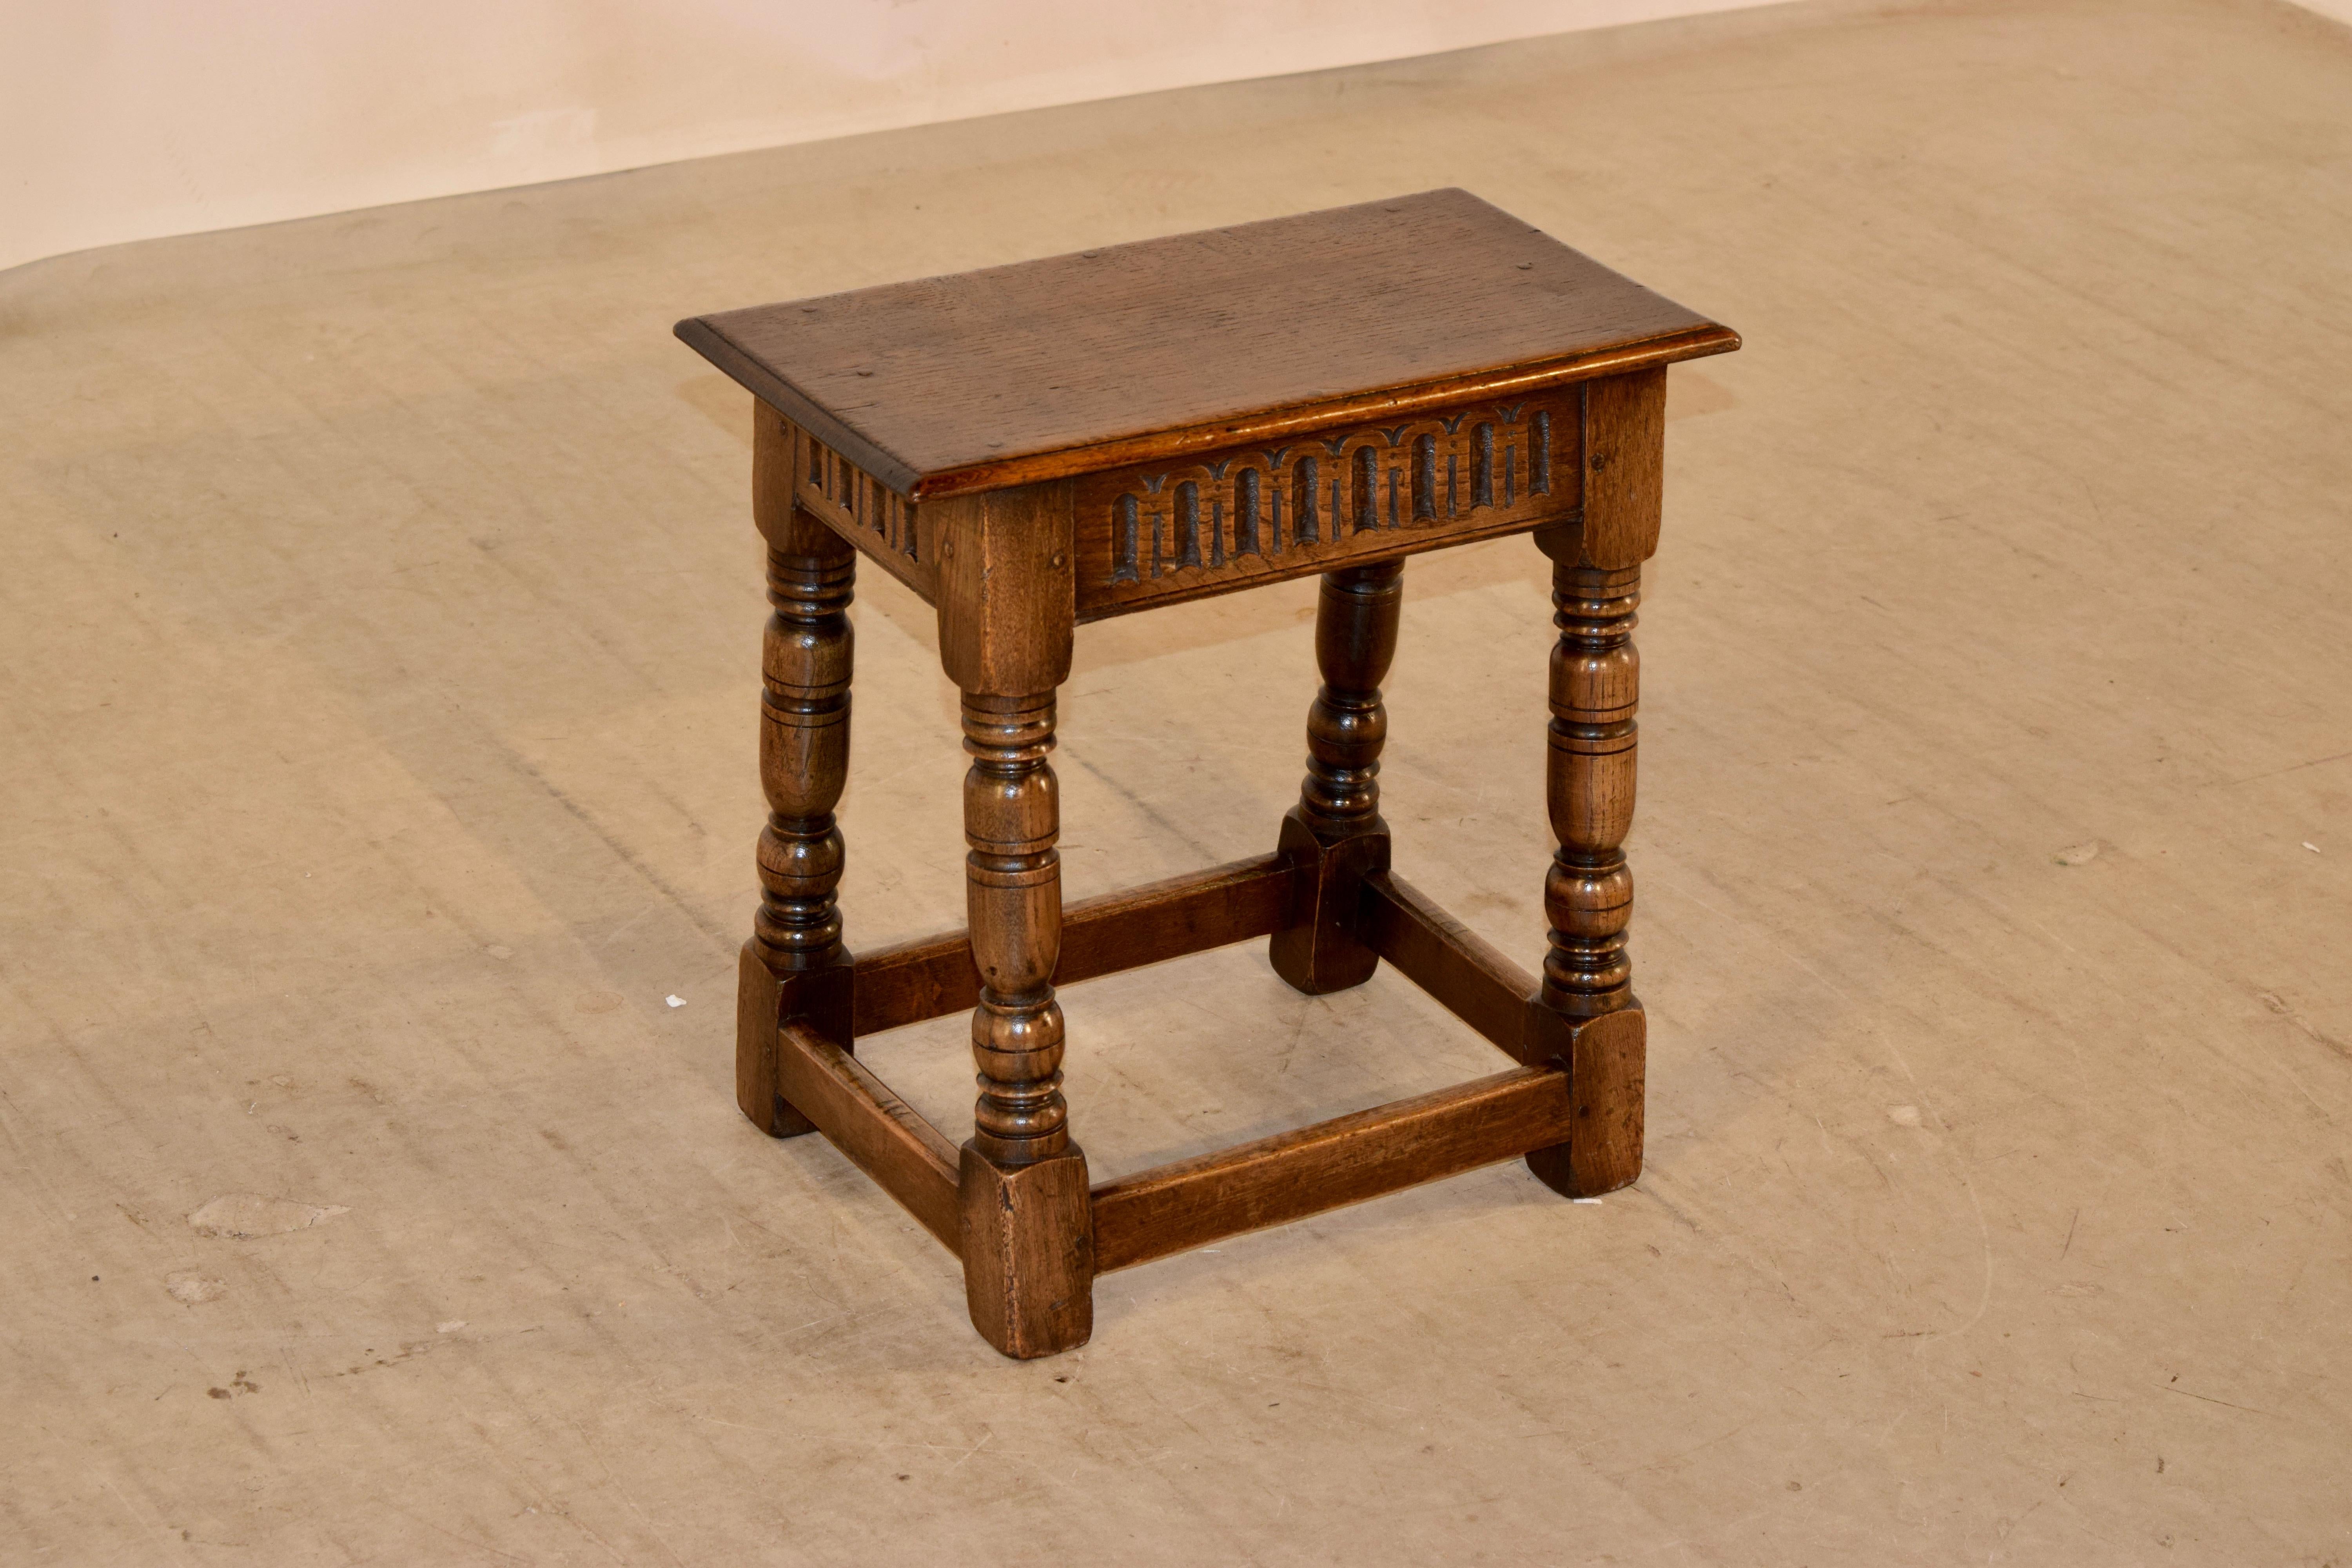 Late 19th century oak joint stool from England. It has a beveled edge around the seat, following down to a hand-carved fluted apron and raised on splayed, hand-turned legs, joined by simple stretchers.